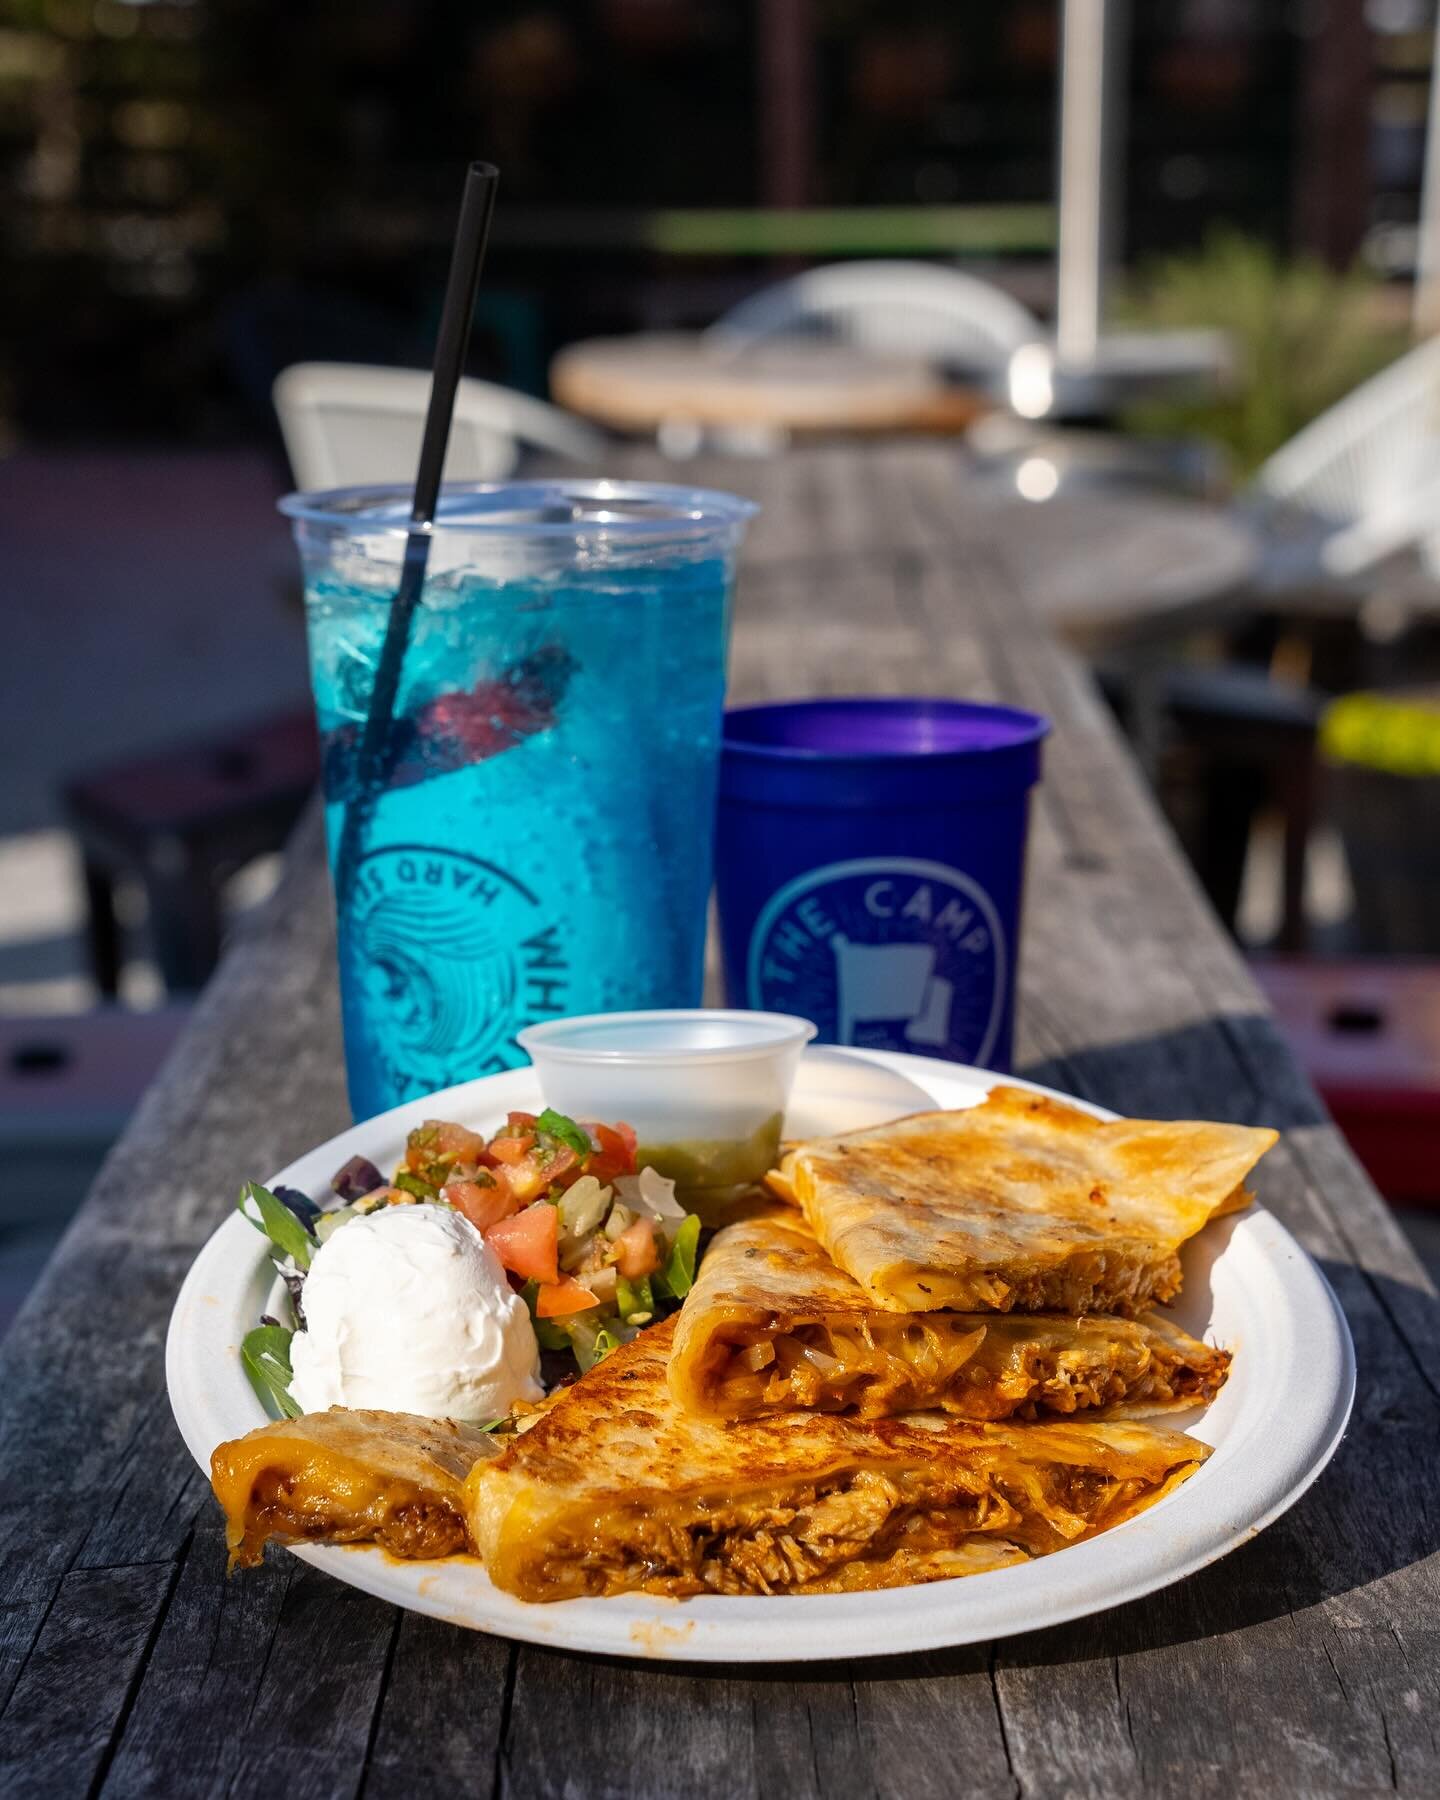 Sunday Funday at The Camp means delicious food and drinks, great music, and The Market at MidCity from 12-4! 

🎶 LIVE MUSIC TODAY 🎶
- Travis Bowlin @travisbowlin 12 PM
- The Dixie Ramblers @the_dixie_ramblers 2 PM
Come through today - the weather i